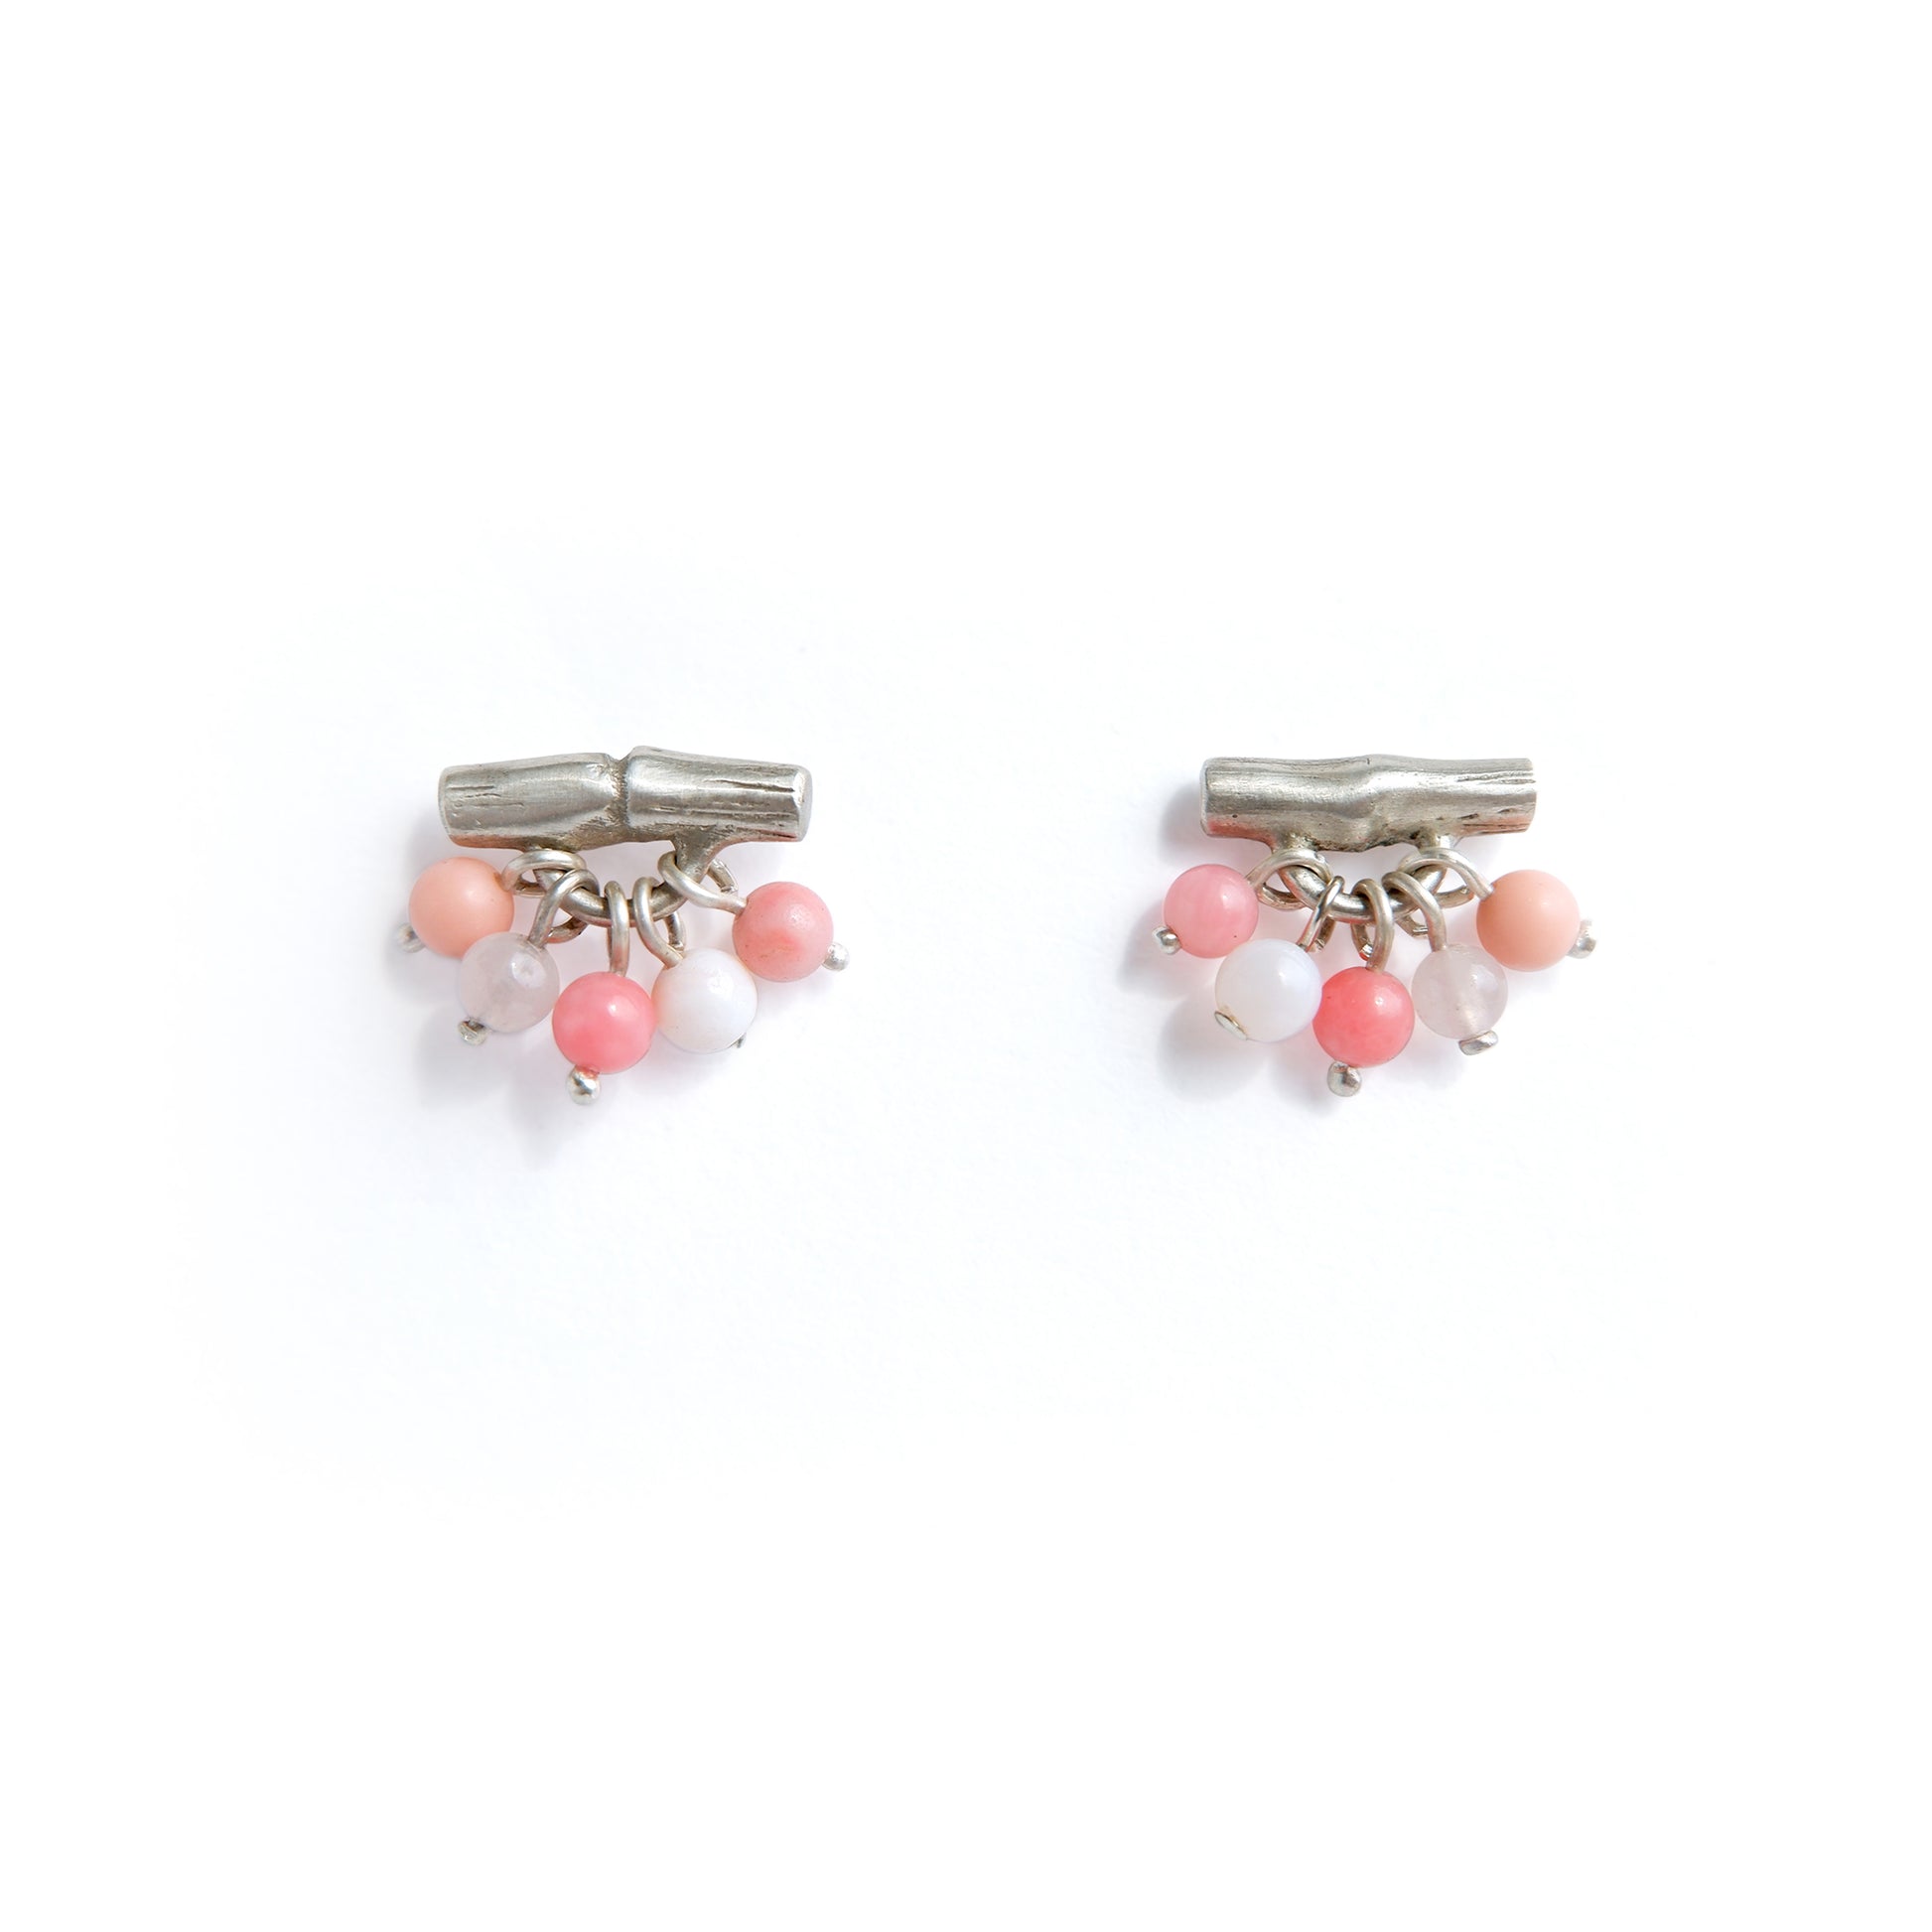 Sterling Silver bamboo bar stud earrings with gemstone beads in coral pink, white background